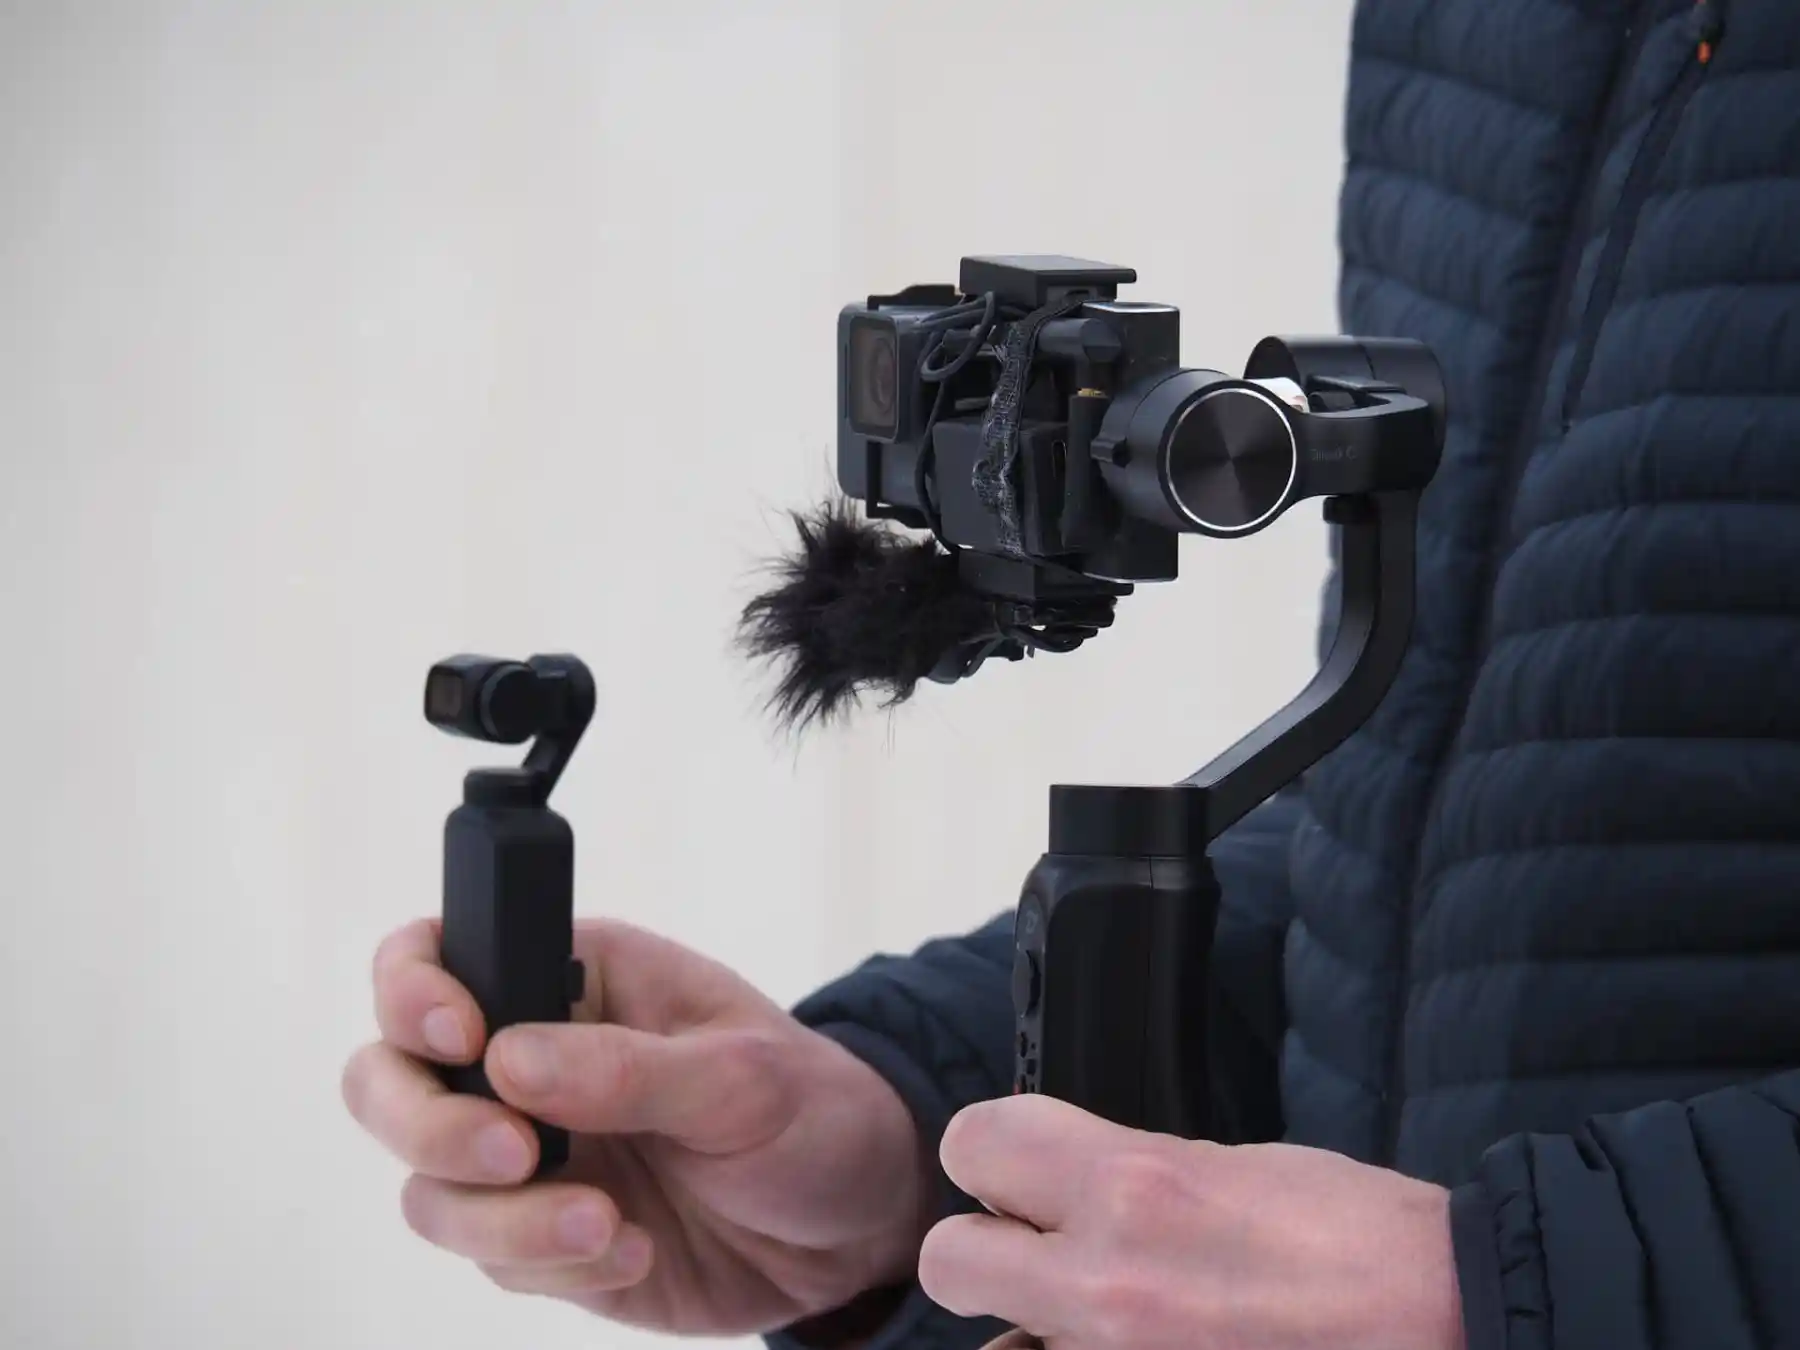 Comparing our current vlogging setup to the DJI Osmo Pocket